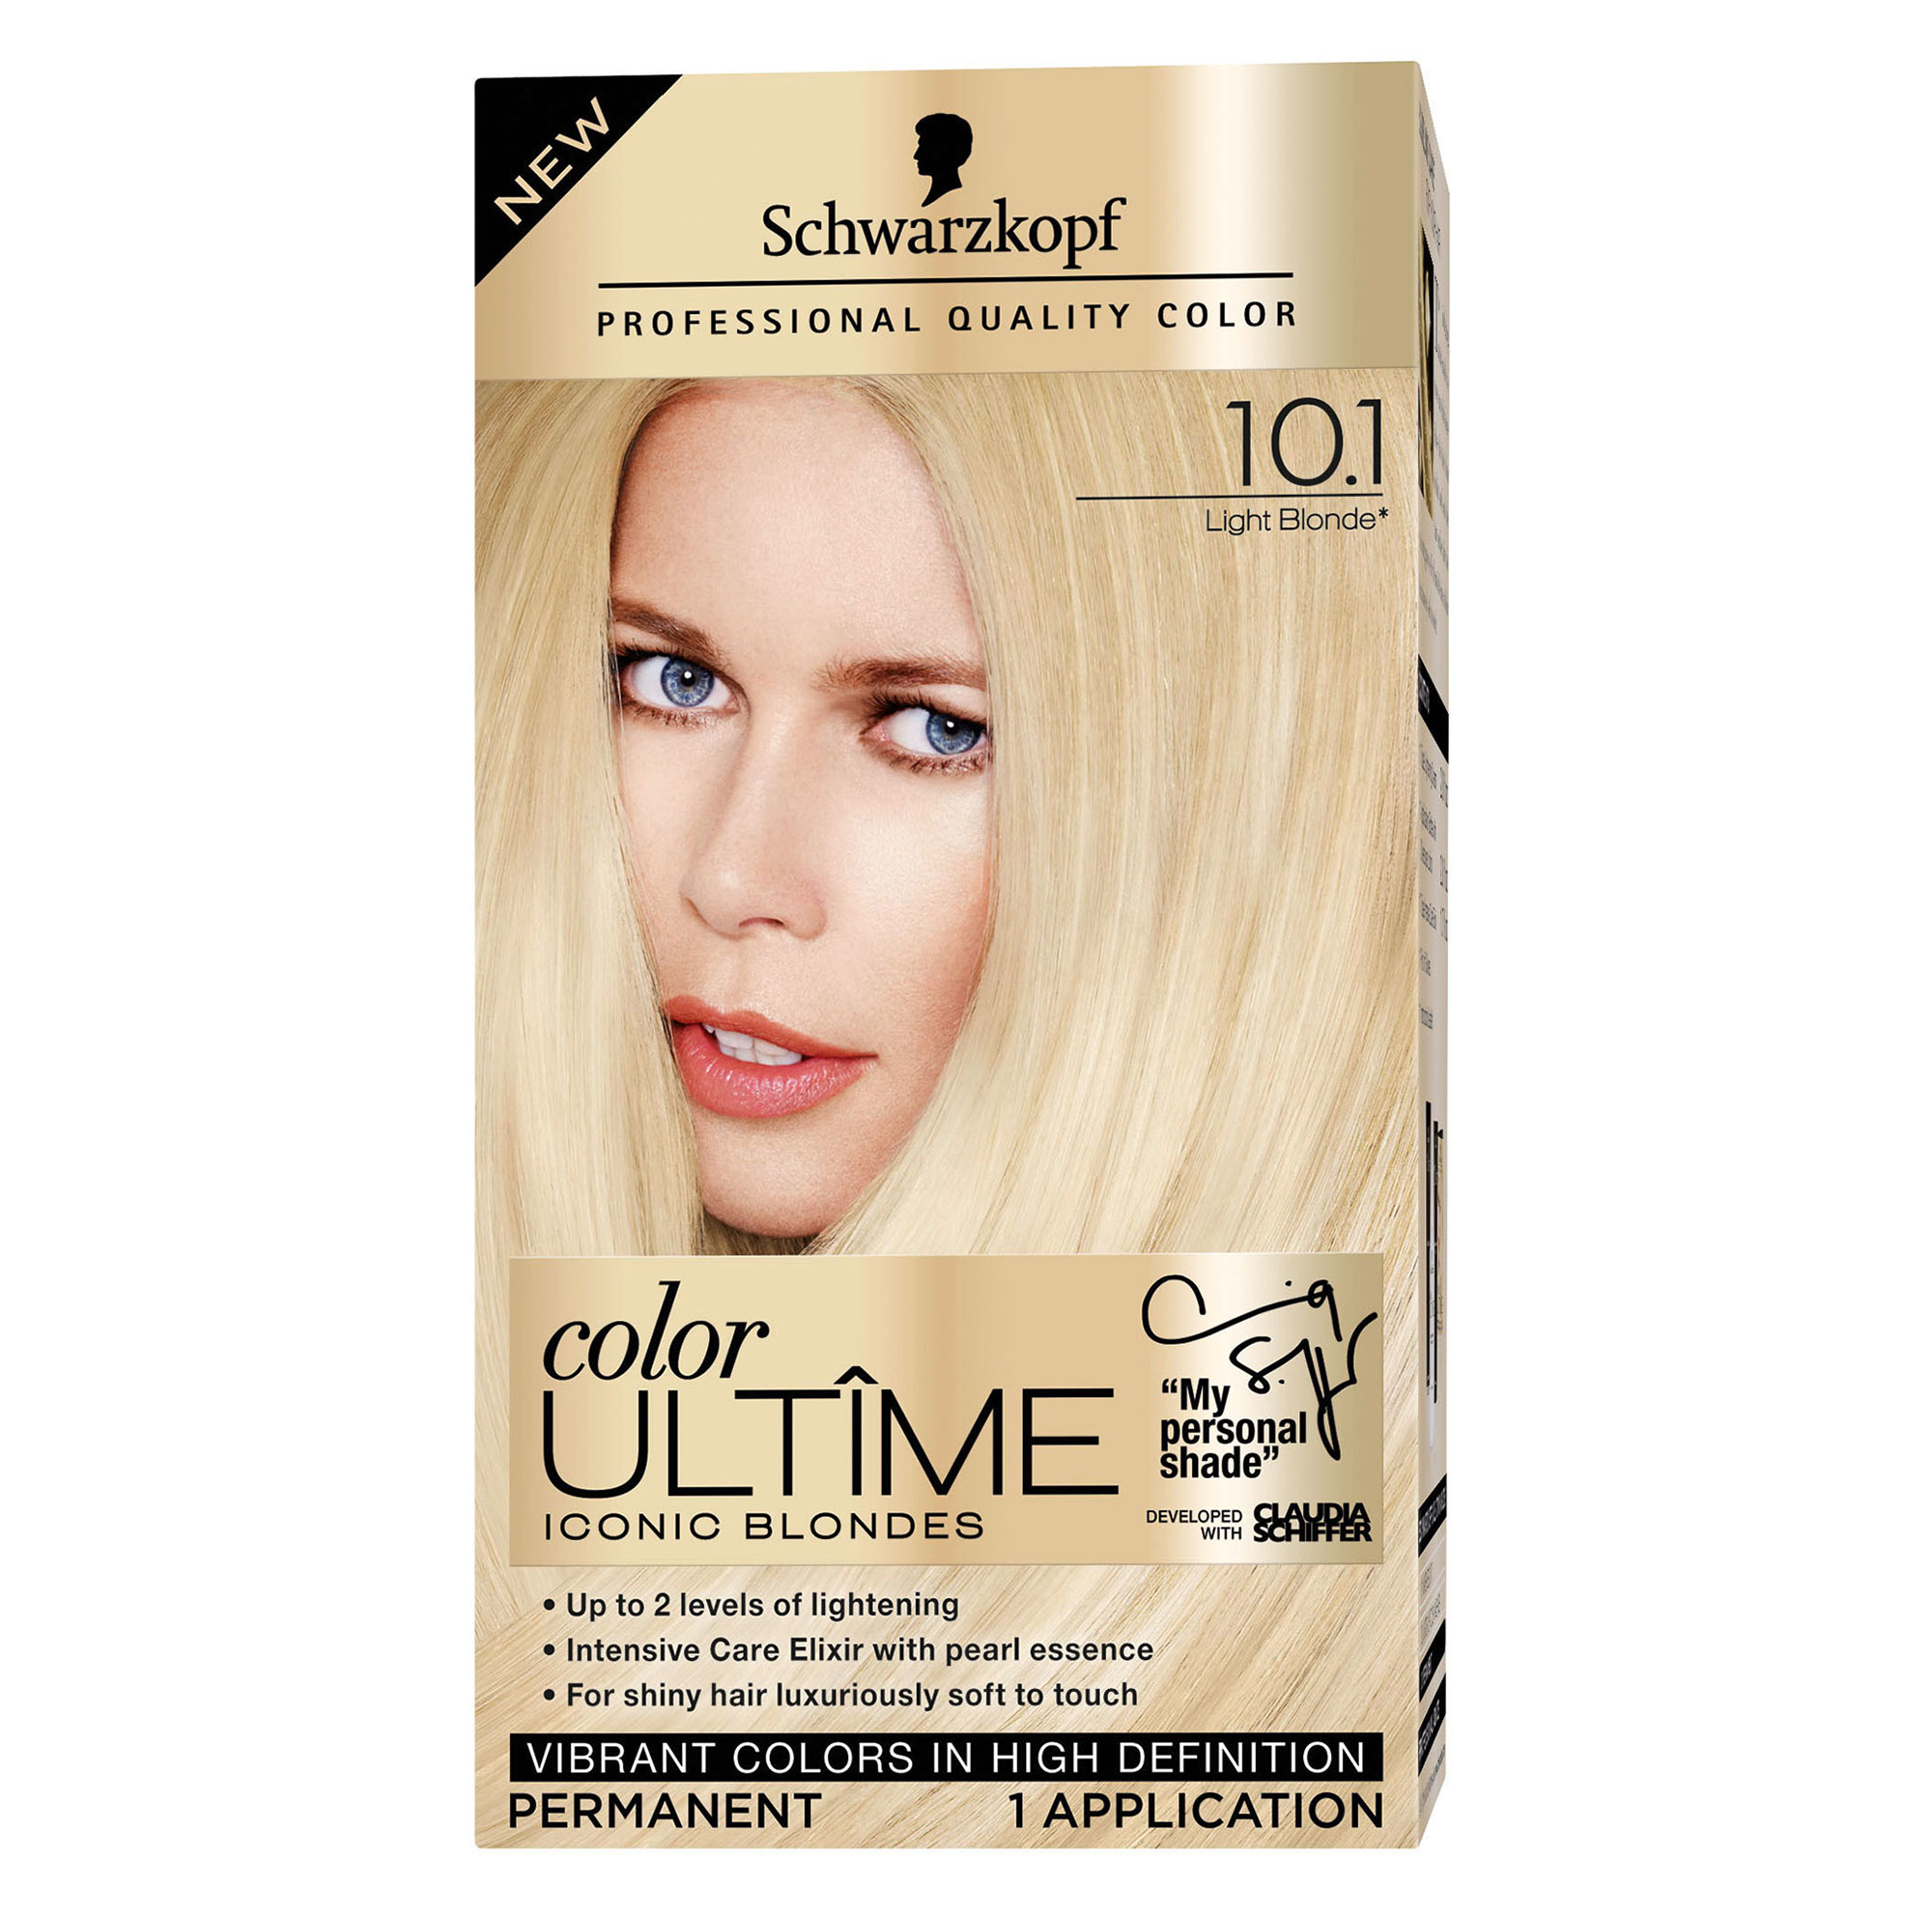 Claudia Schiffer unveils new line of hair products for Schwarzkopf 